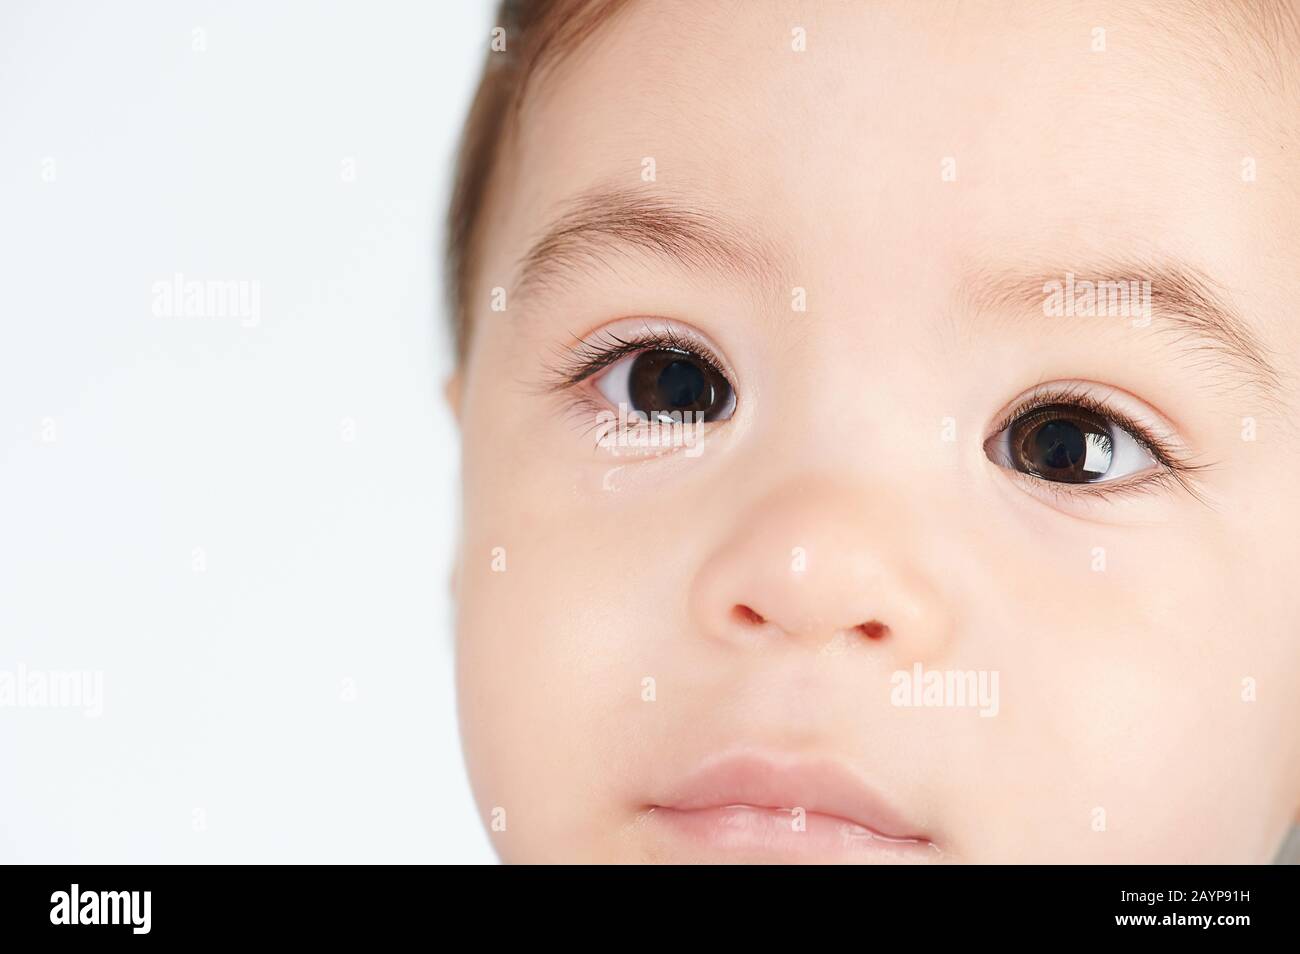 Baby girl with wet eyes close up view isolated on white background Stock Photo